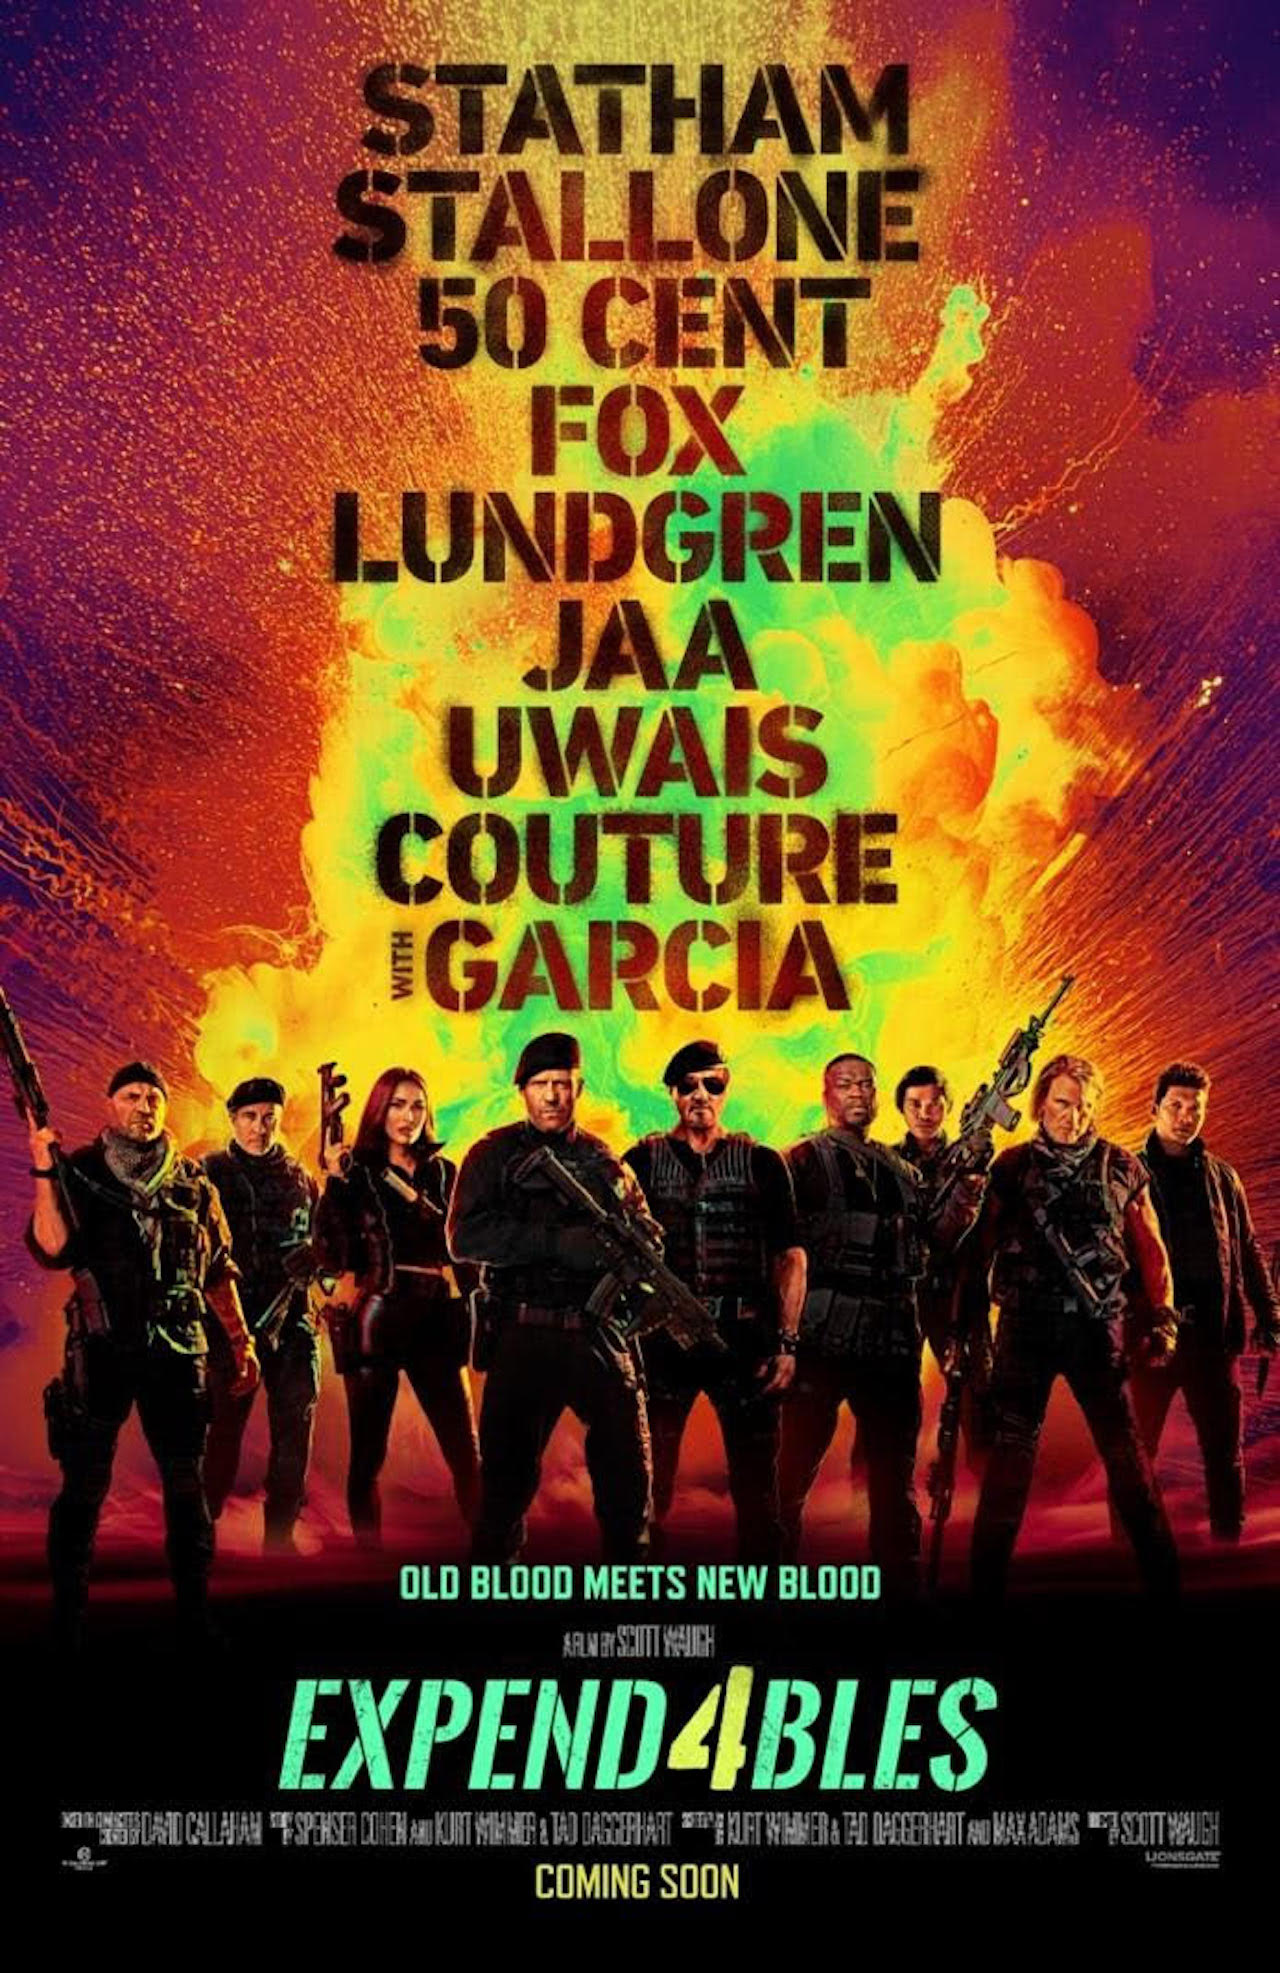 The Expendables 4 poster